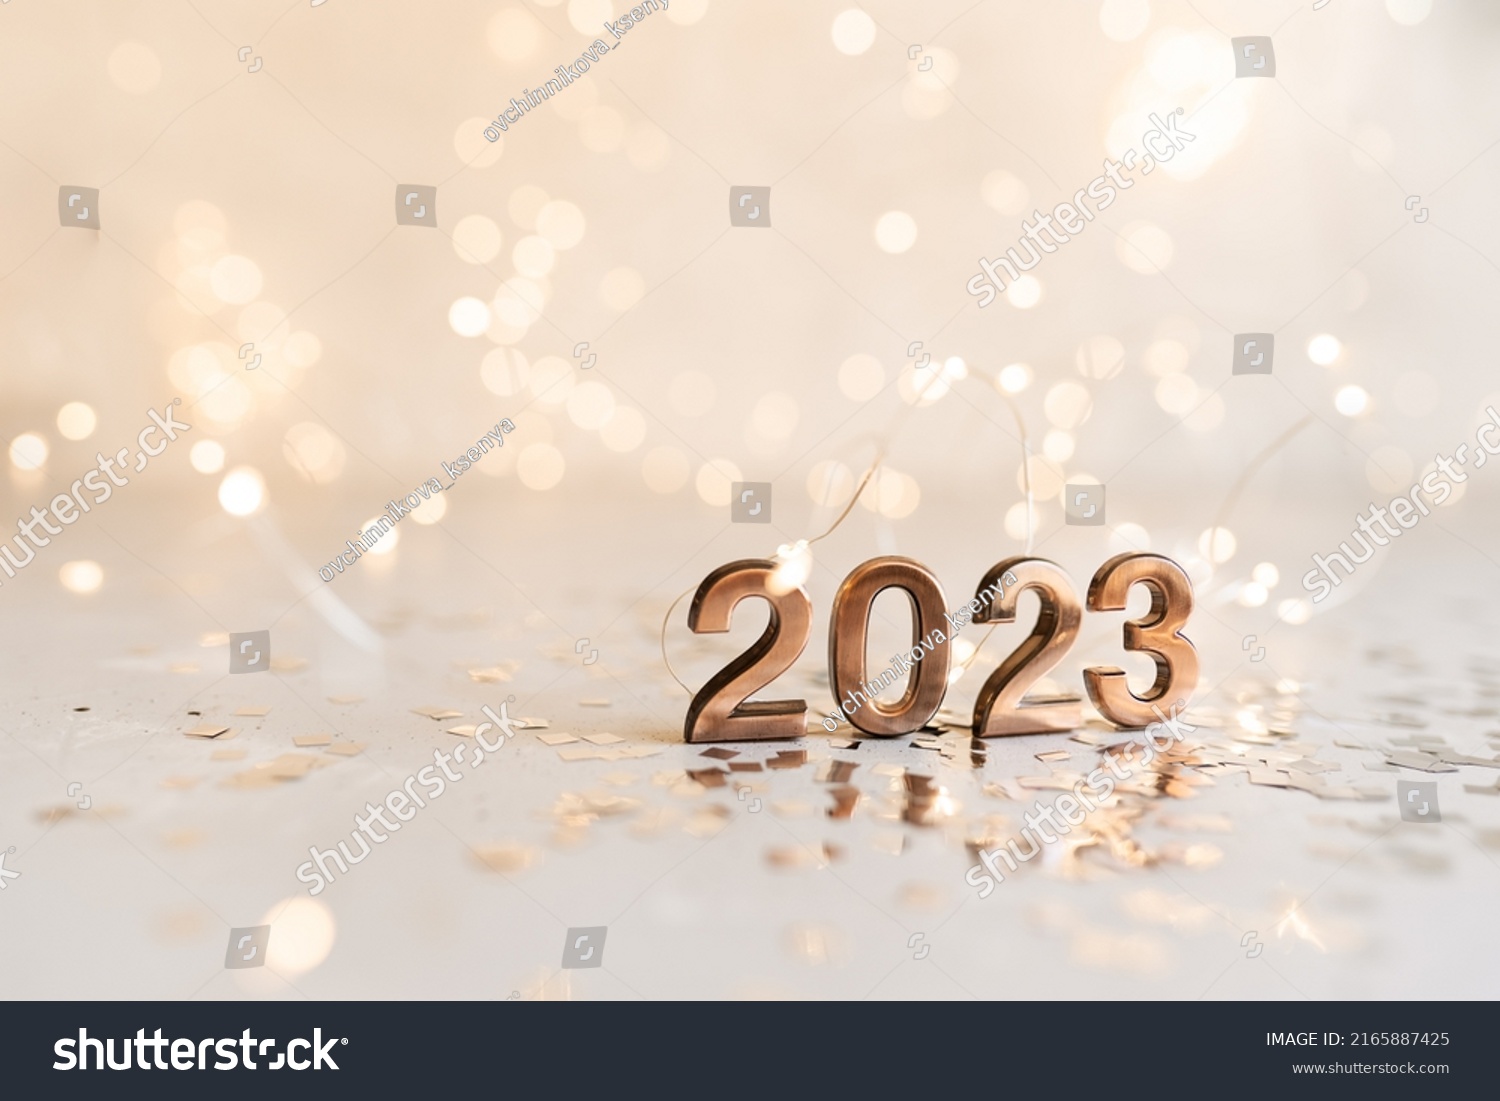 happy new year 2023 background new year holidays card with bright lights,gifts and bottle of hampagne #2165887425